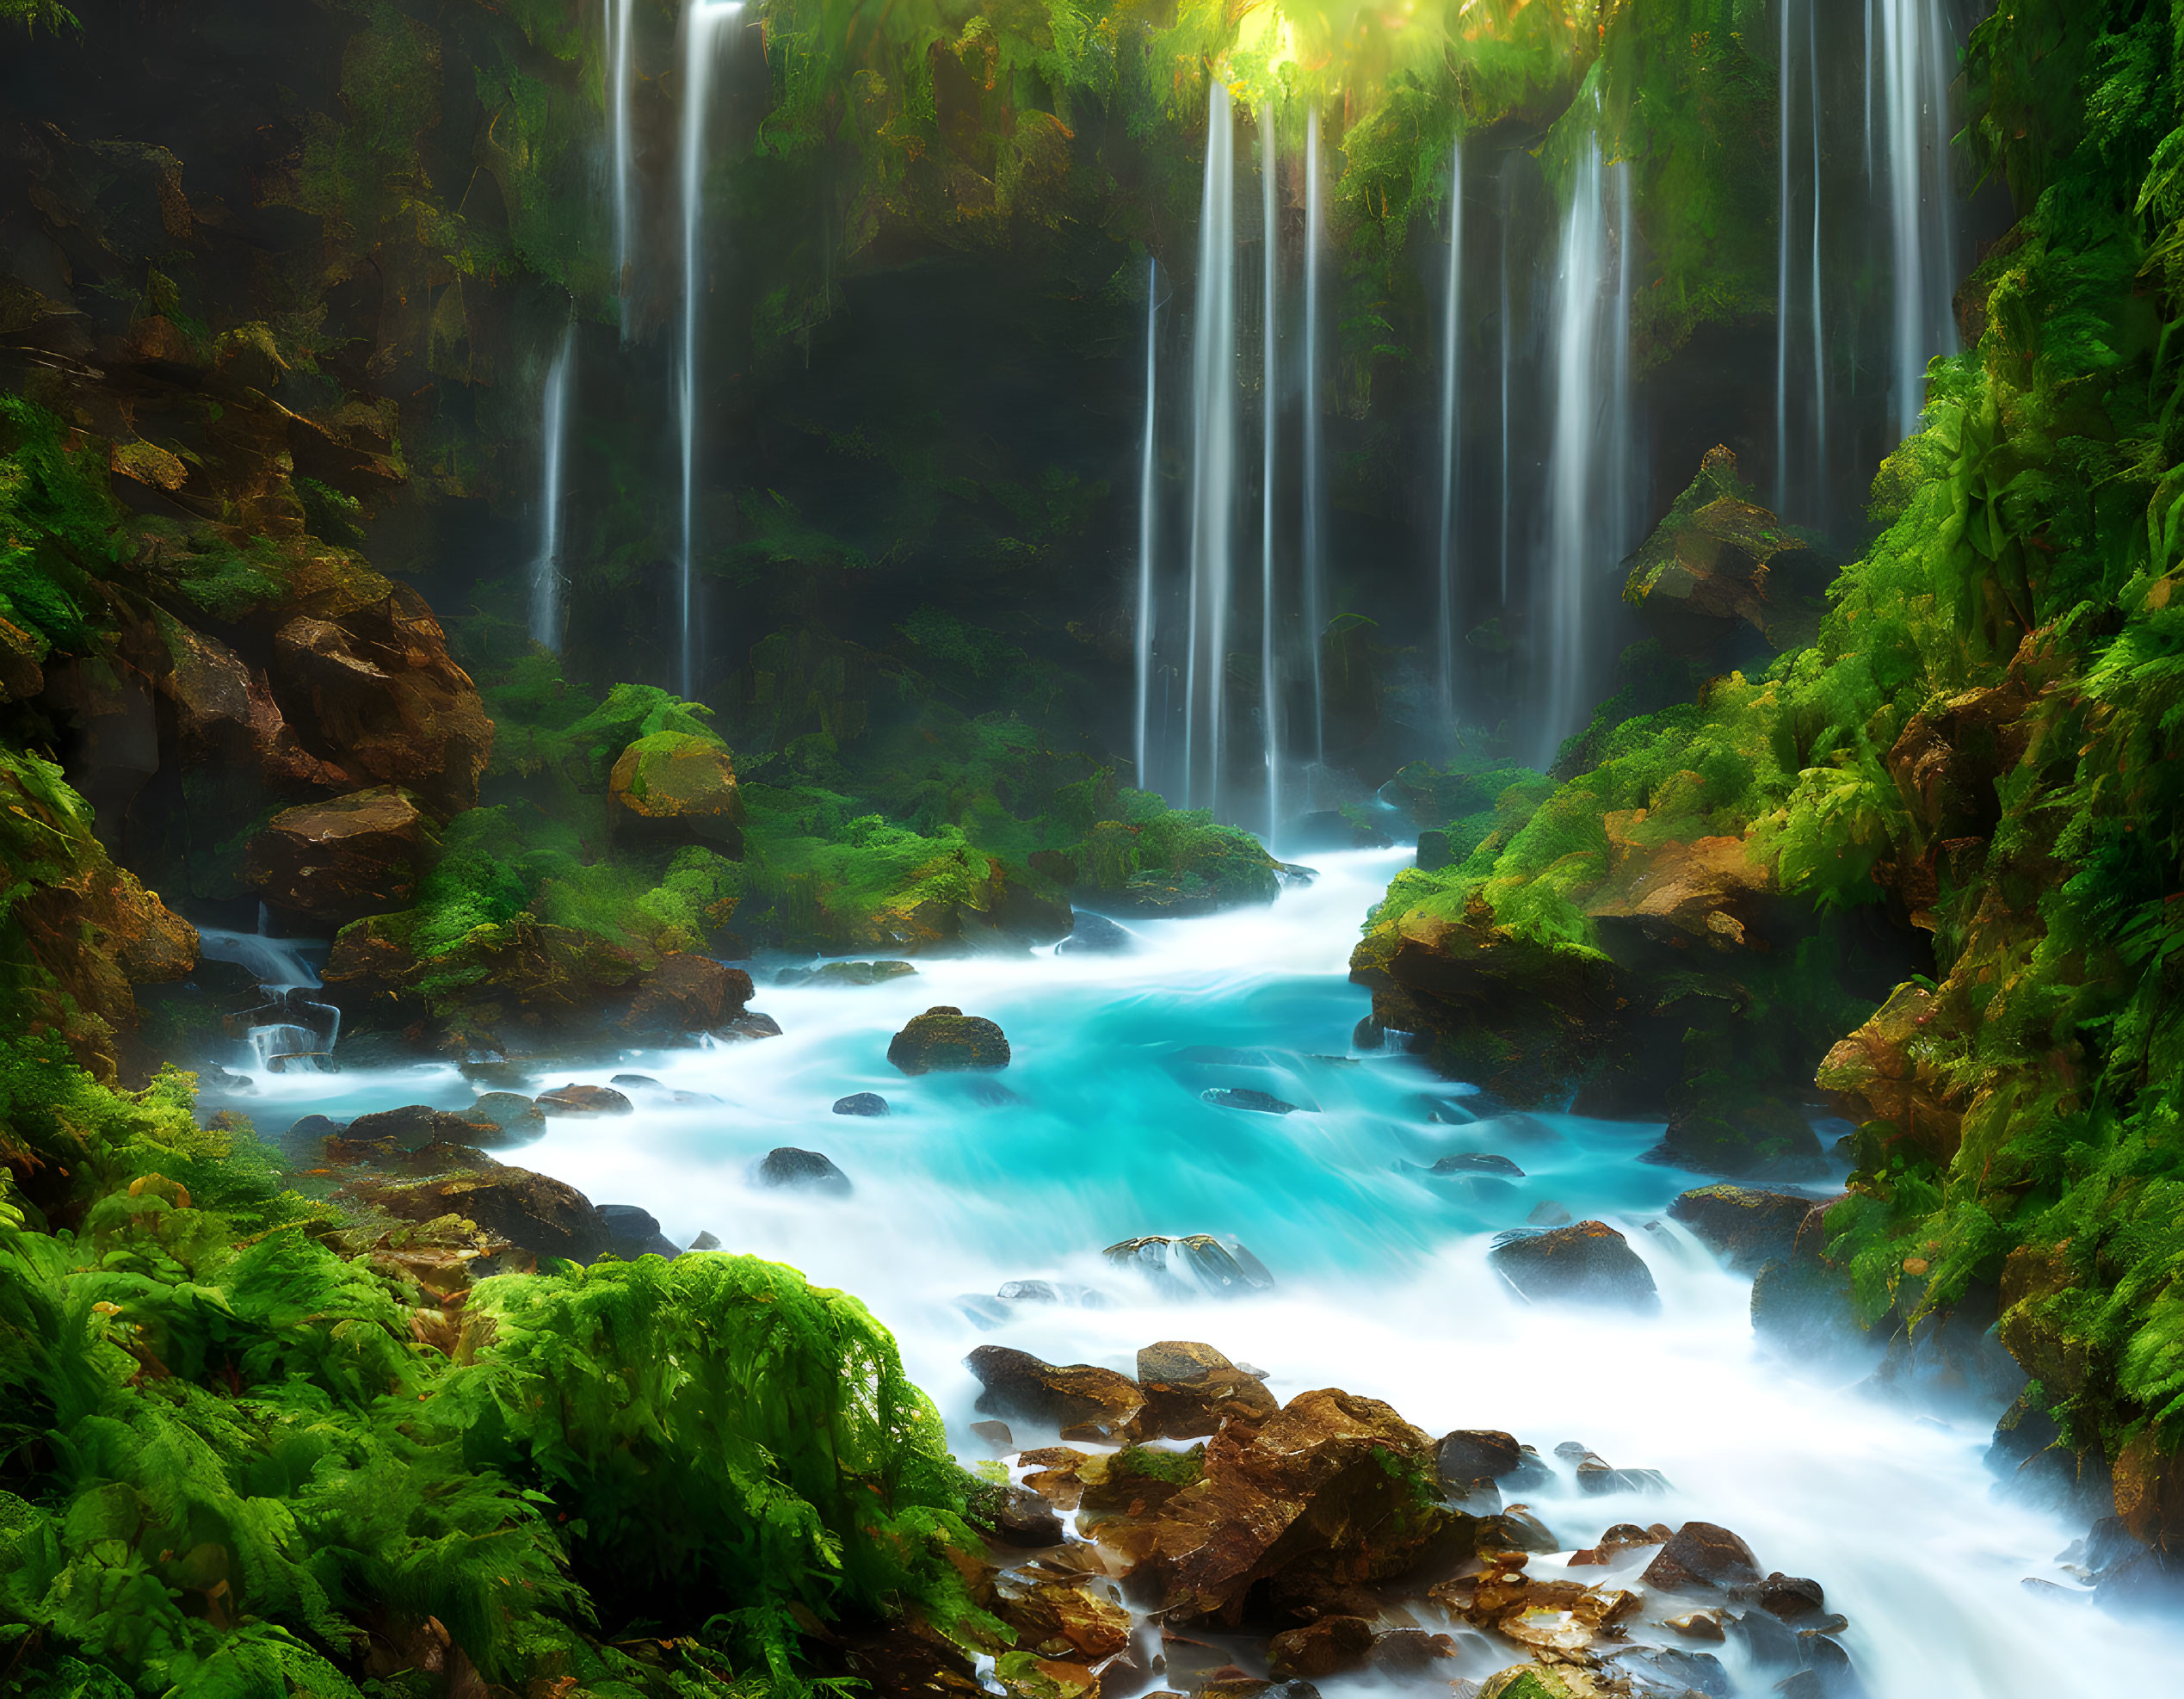 Tranquil Waterfall in Lush Greenery and Turquoise Water